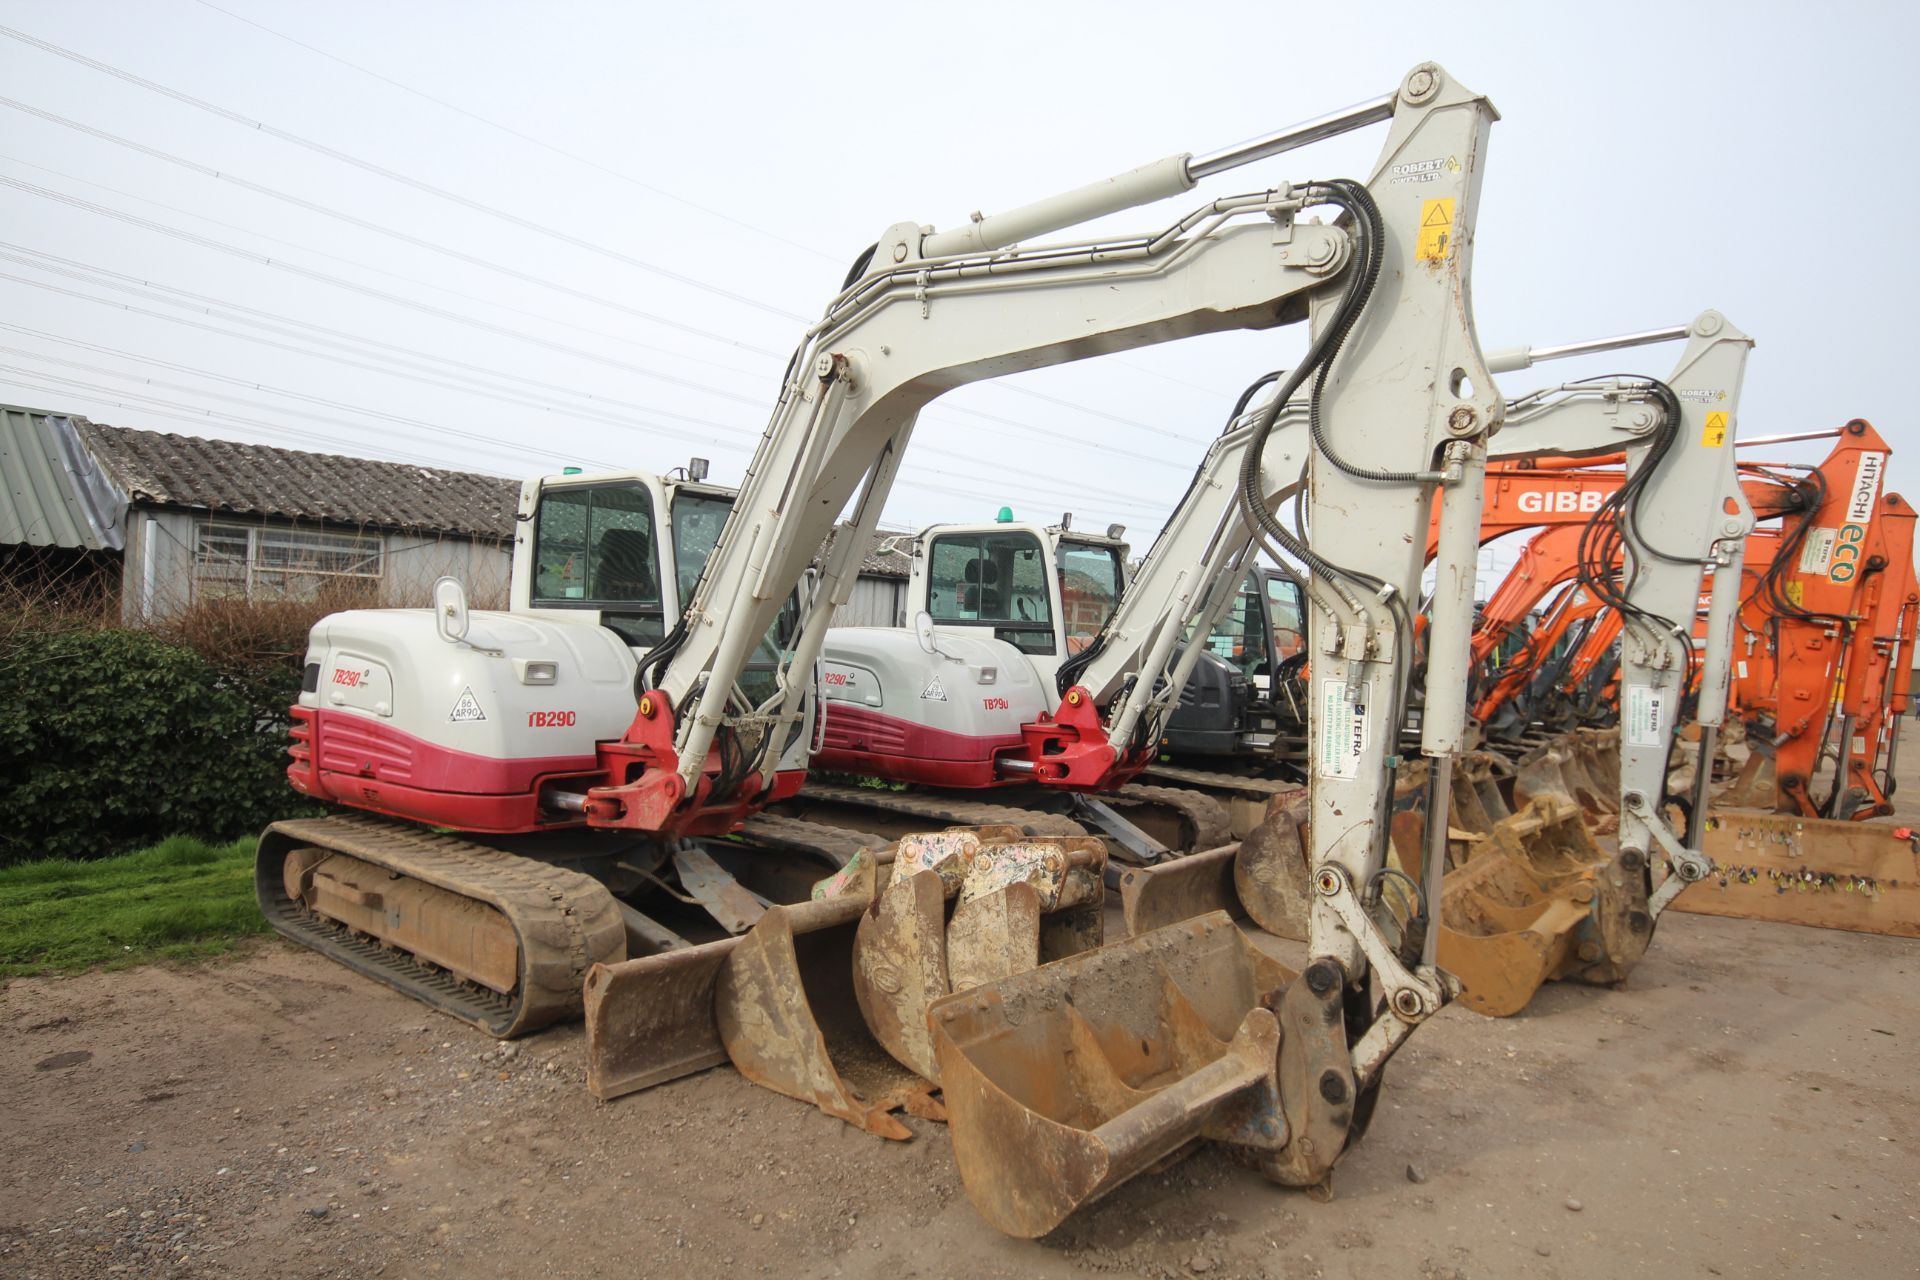 Takeuchi TB290 9T rubber track excavator. 2018. 5,096 hours. Serial number 190200950. With 4x